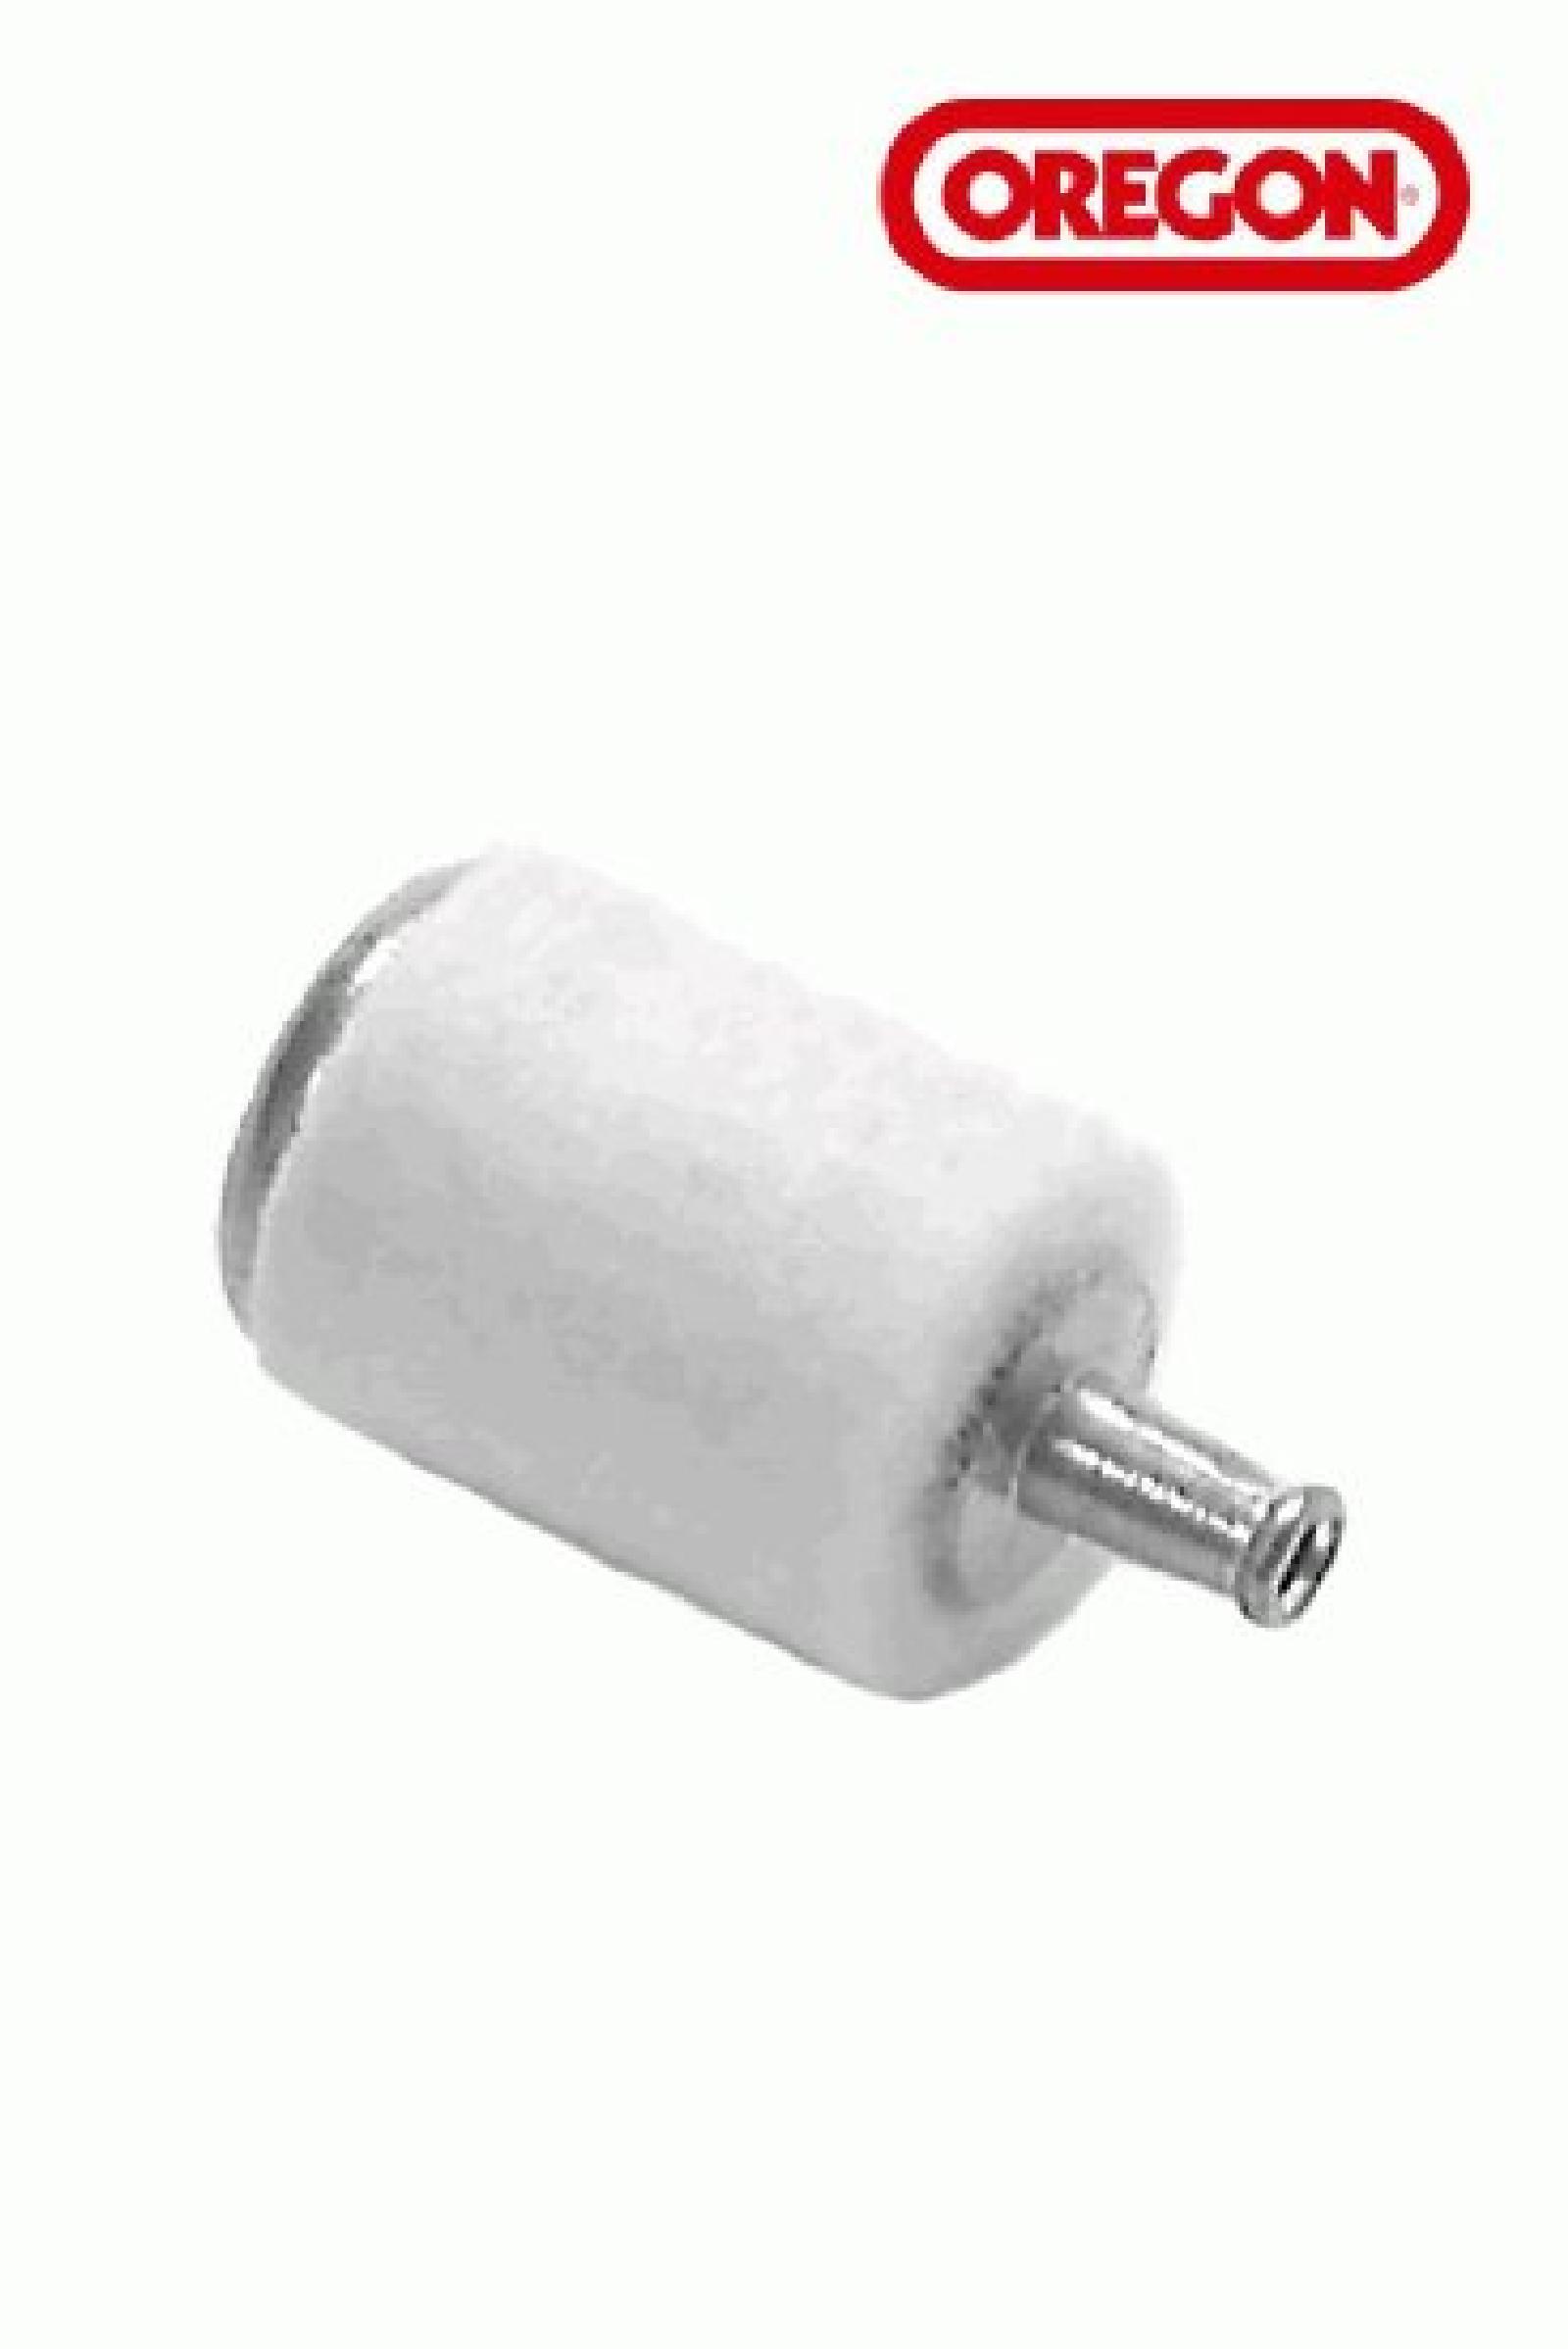 FUEL FILTER ASSY 1/8IN TI part# 07-207 by Oregon